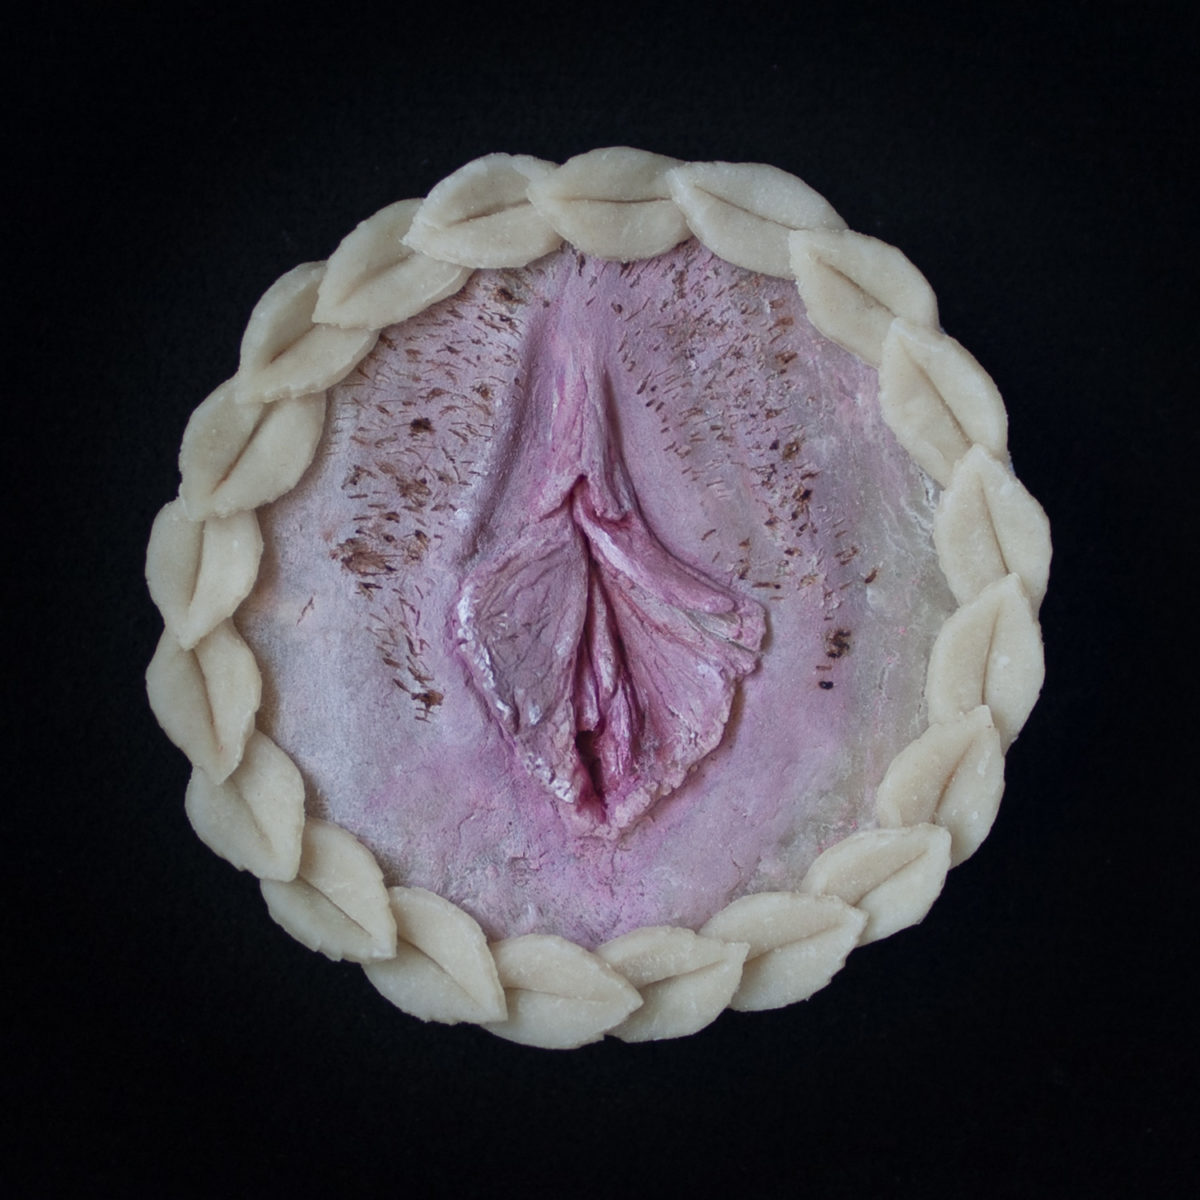 Vulva pie on black background. Pie is a realistic vulva made of pie dough painted with edible paints.